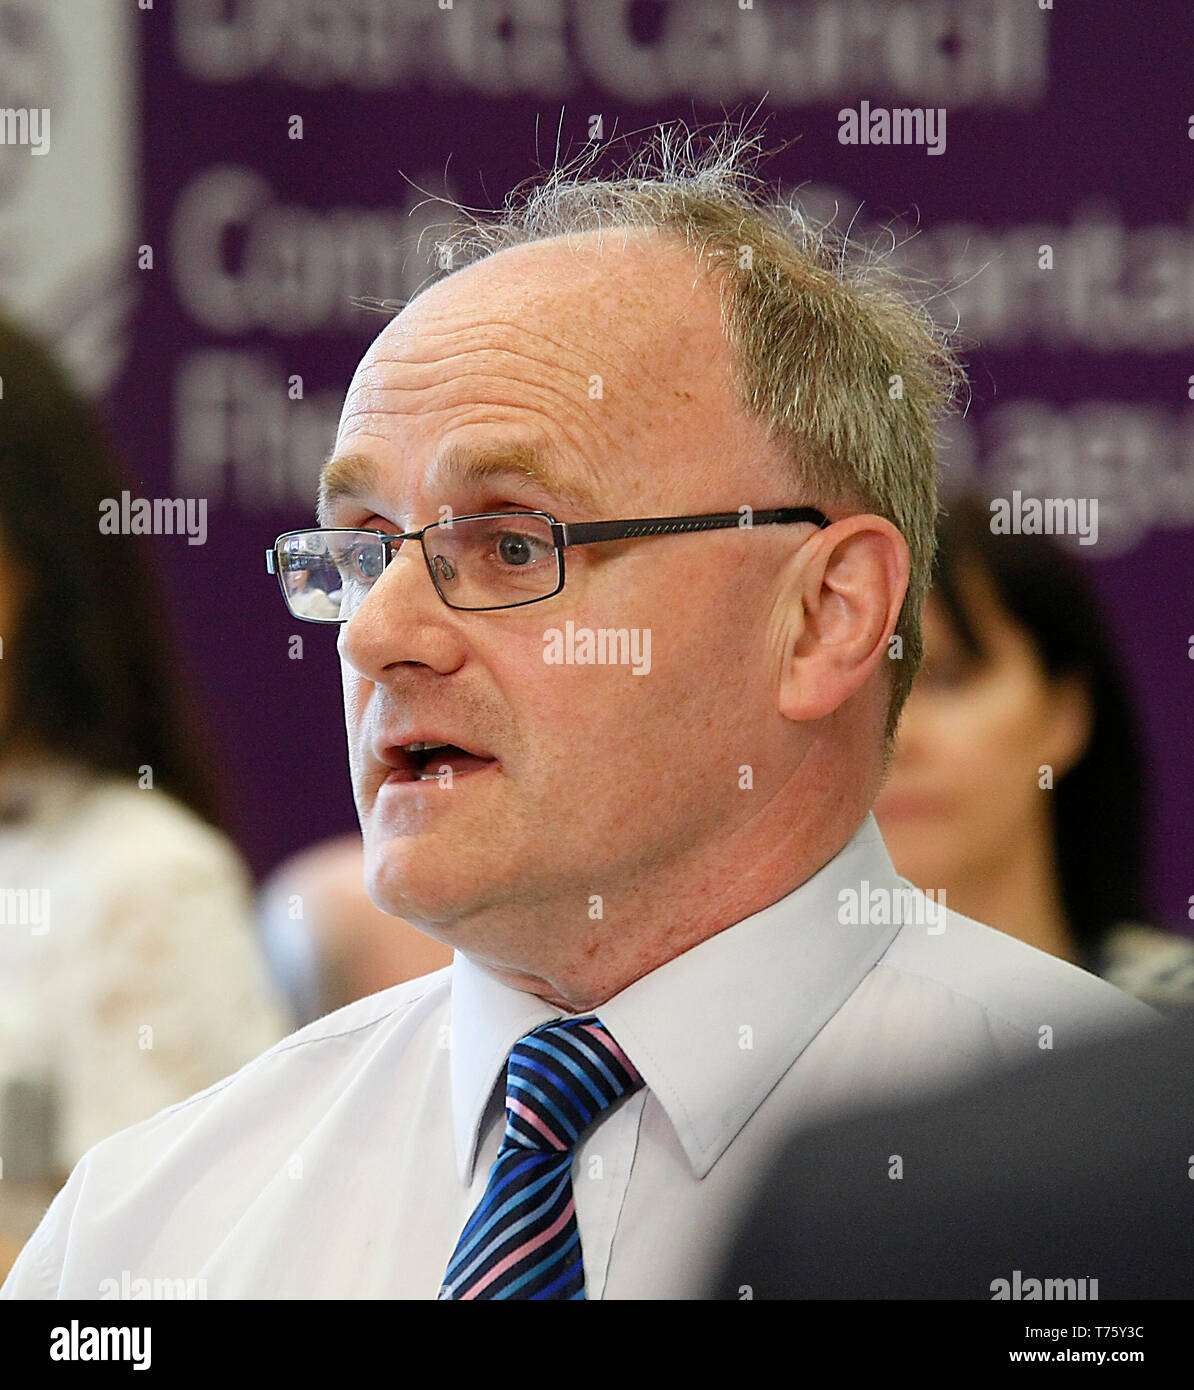 Barry McElduff speaks to the media at the local elections count at Omagh Leisure Centre after he secured a seat on the Fermanagh and Omagh District Council. Stock Photo